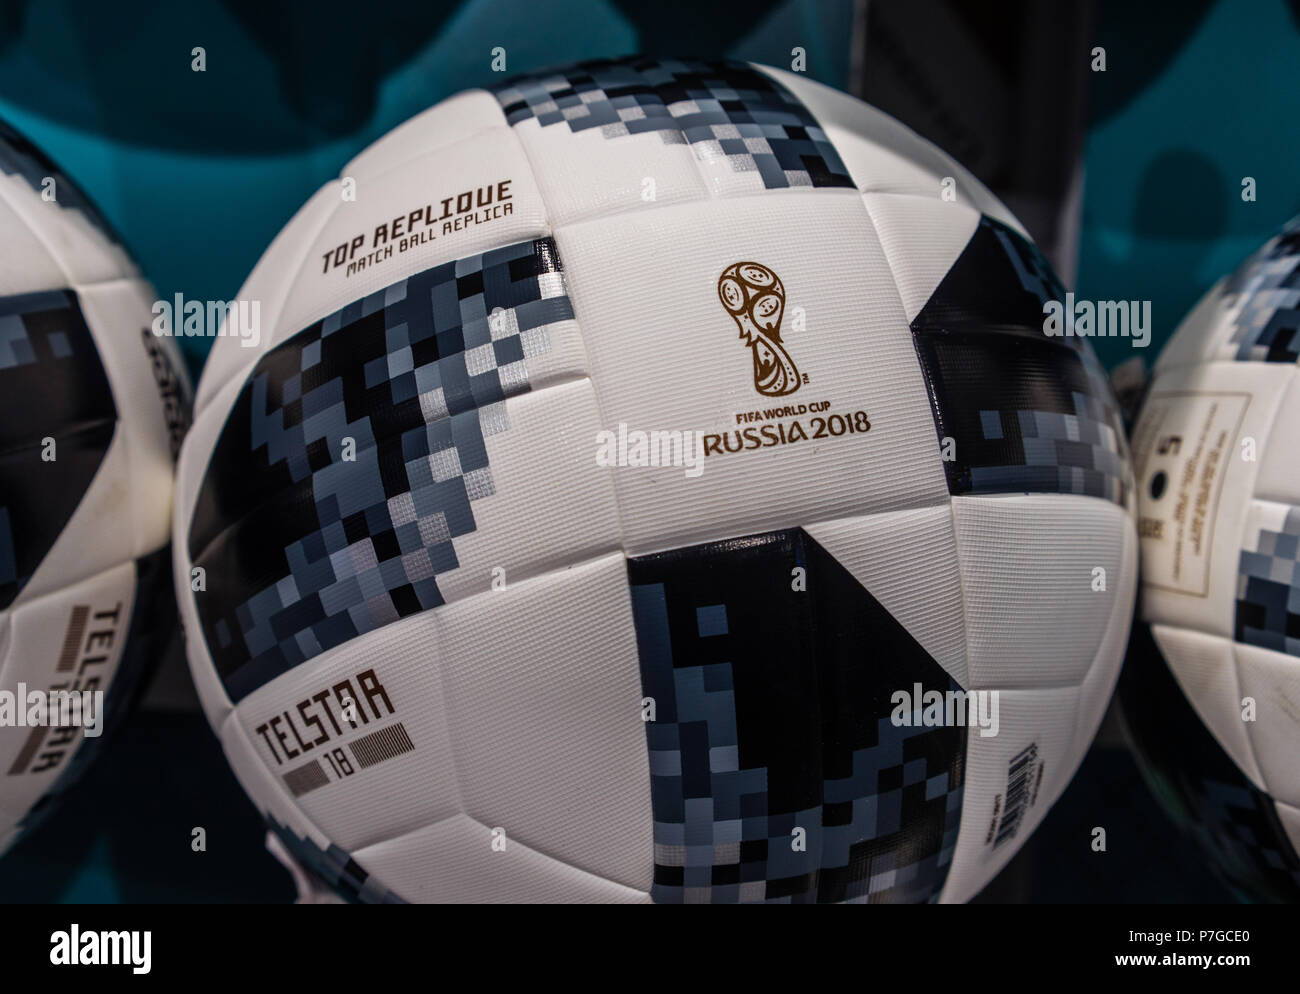 2 July 2018 The official ball the FIFA World Cup 2018 Adidas Telstar 18 Stock Photo - Alamy